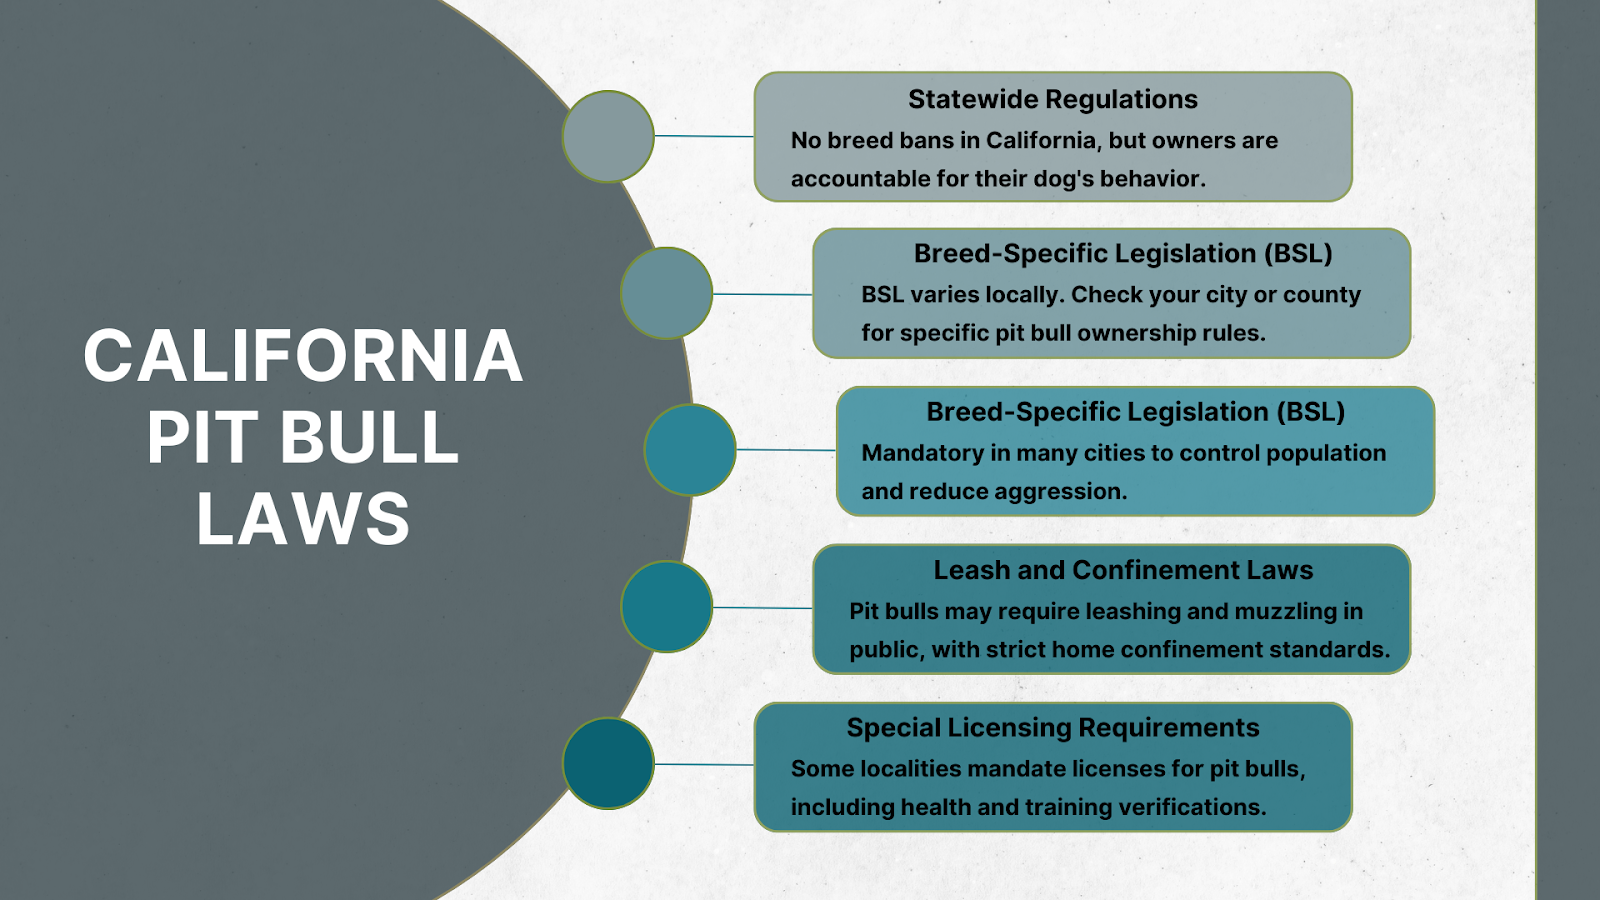 Are there special rules in California as to Pit Bulls?